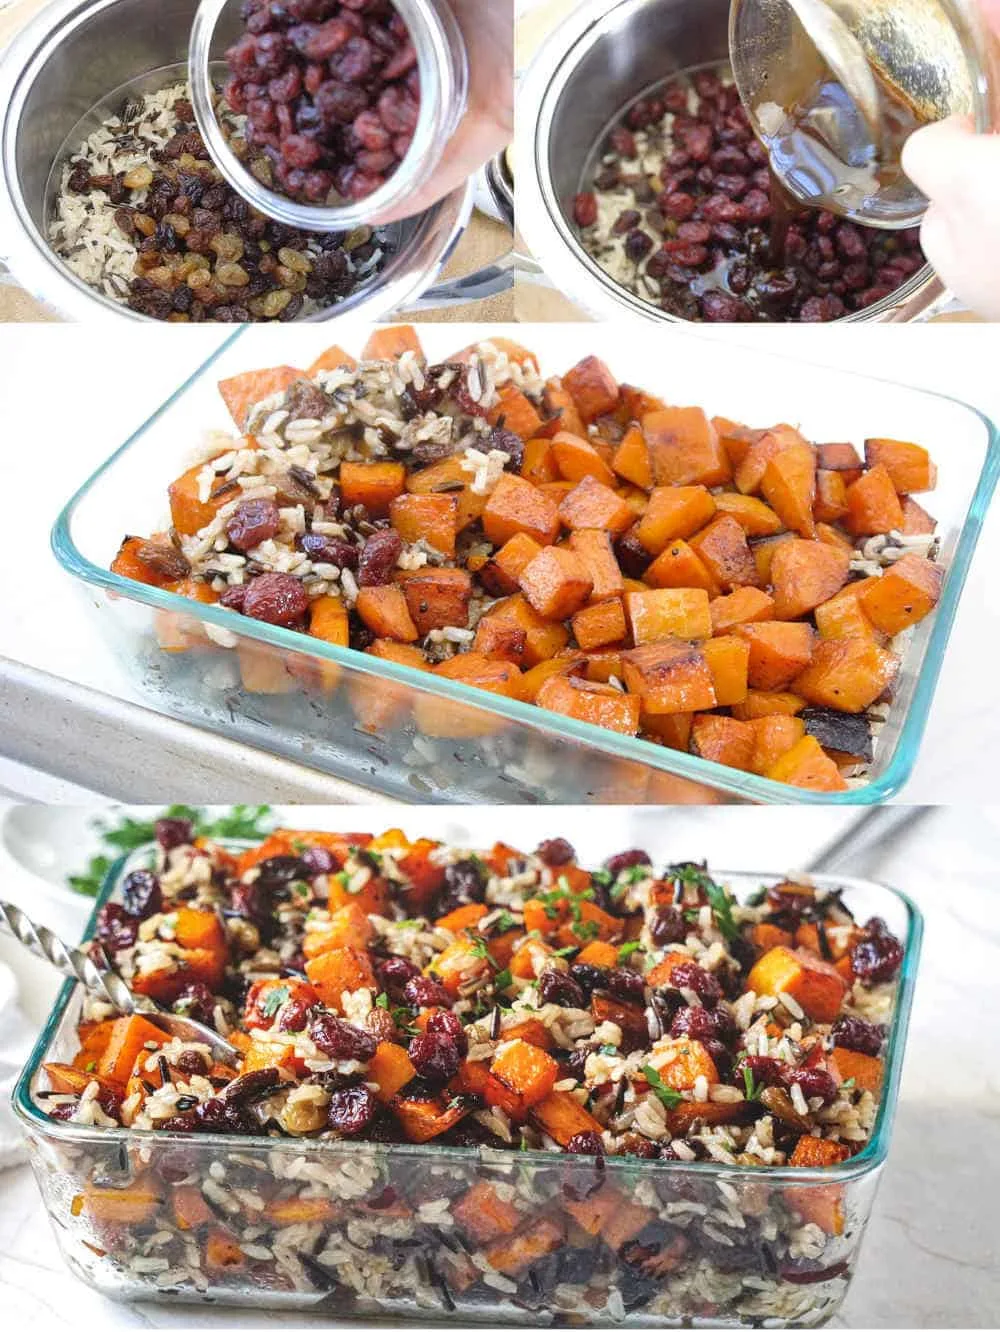 Process shots showing how to make and assemble a healthy vegan butternut squash casserole with roasted sweet potatoes and rice.